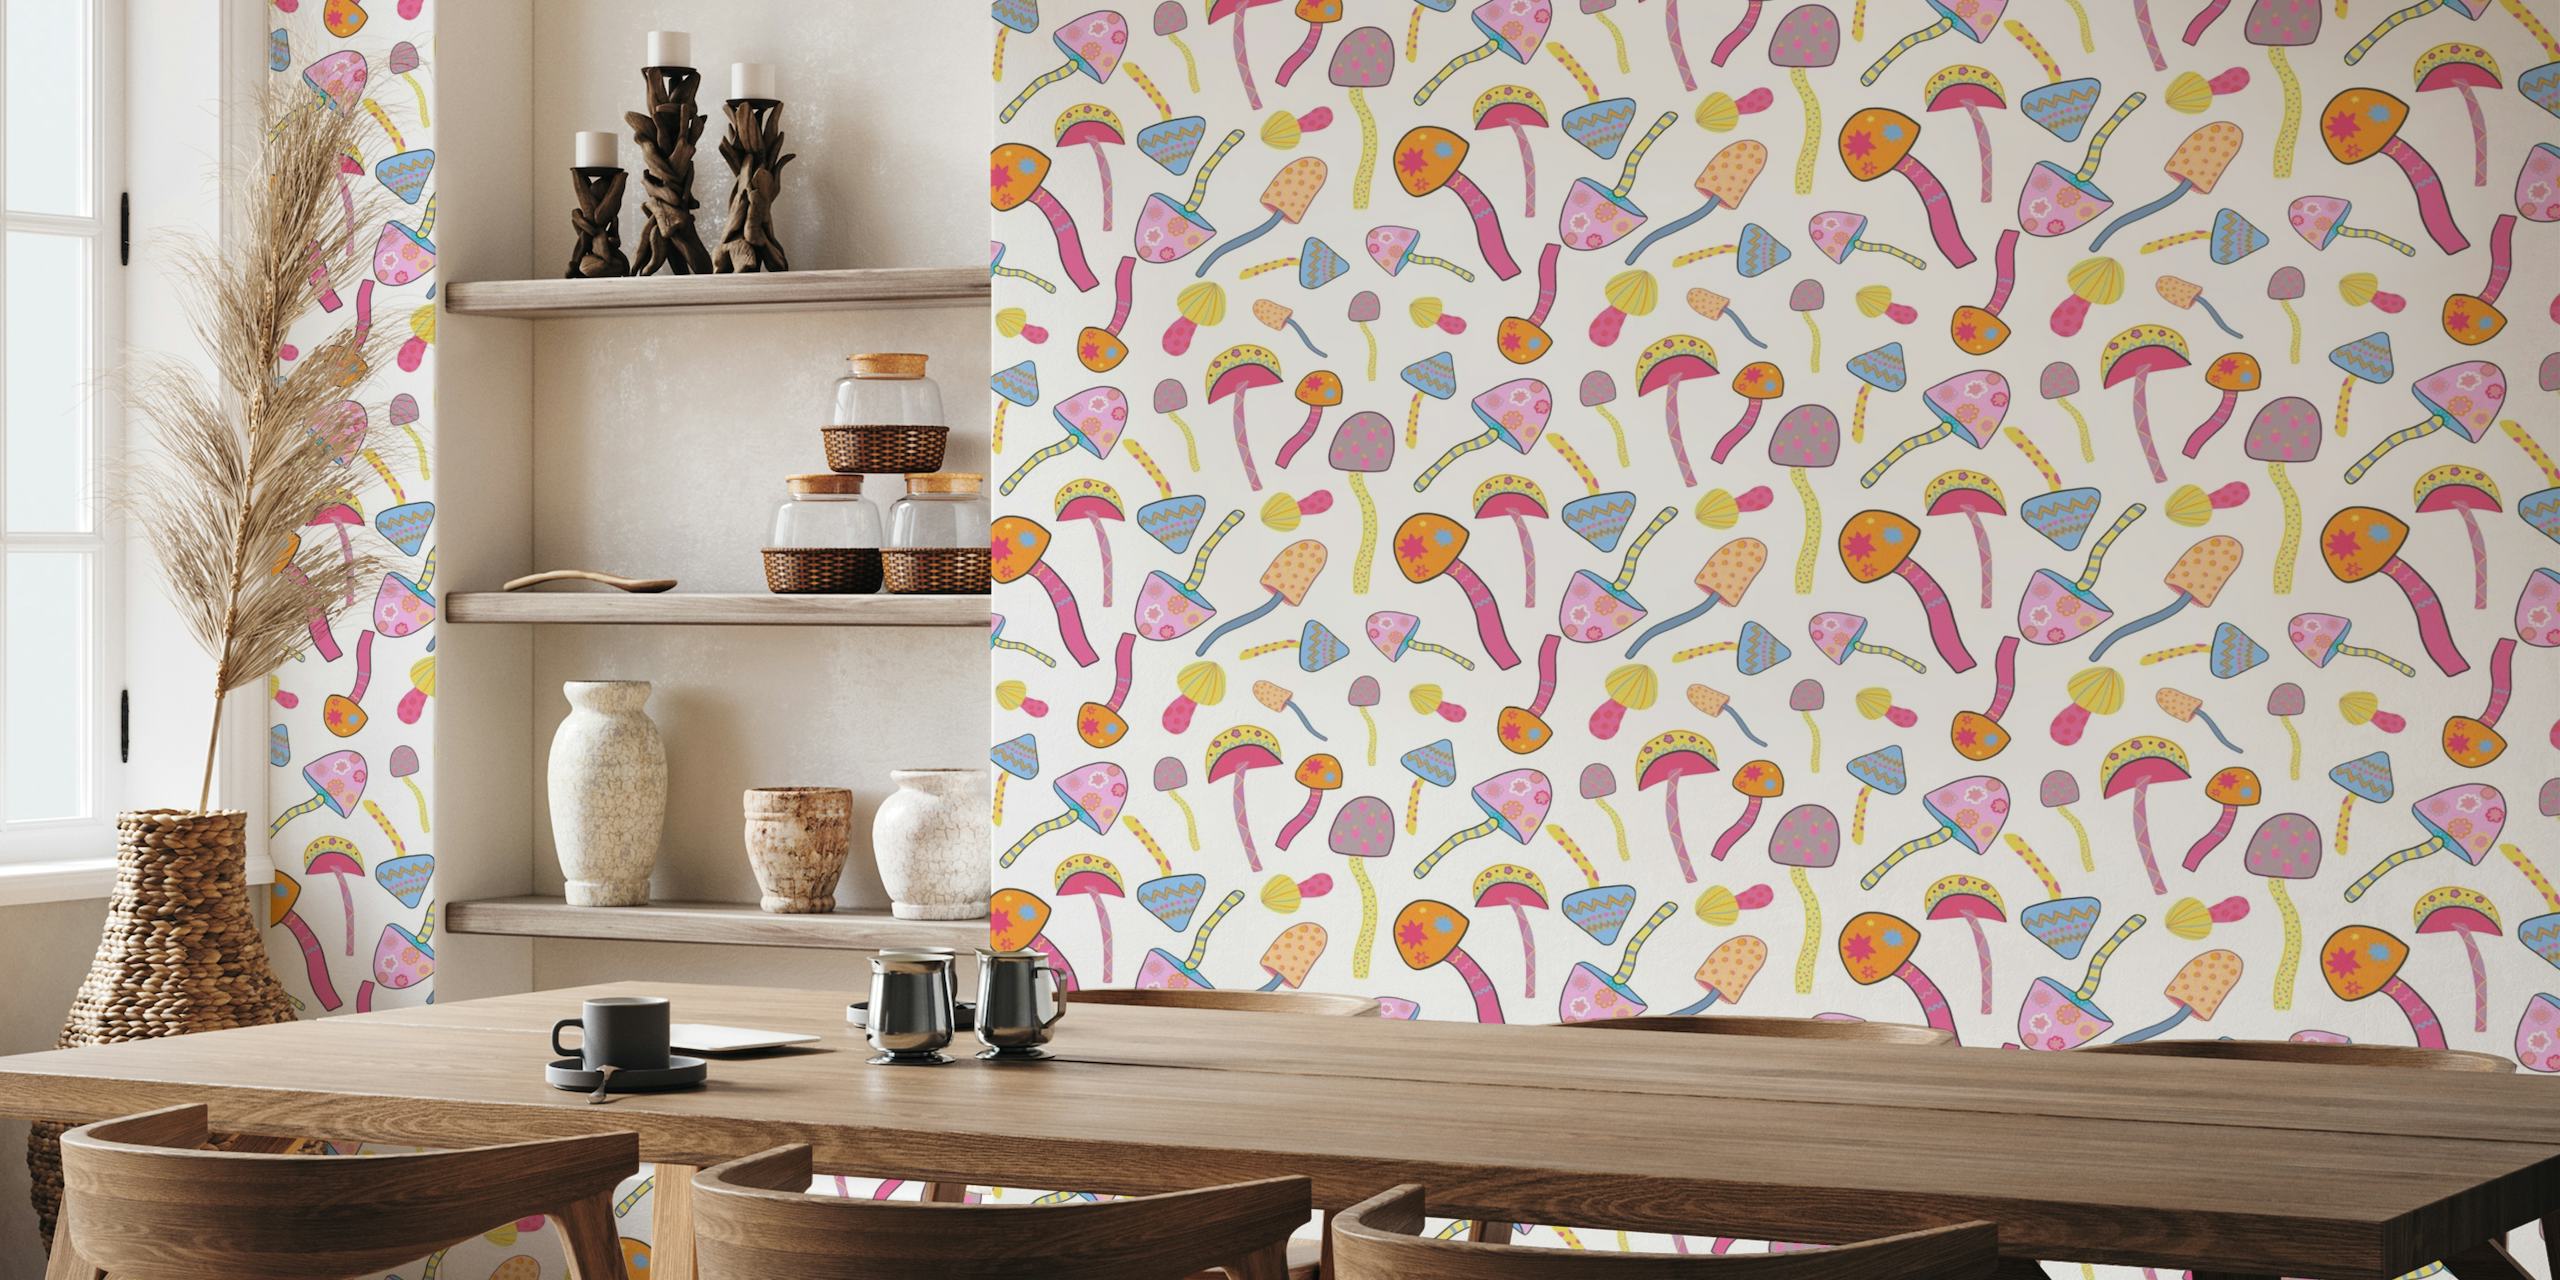 Colorful and patterned mushrooms on white background wall mural